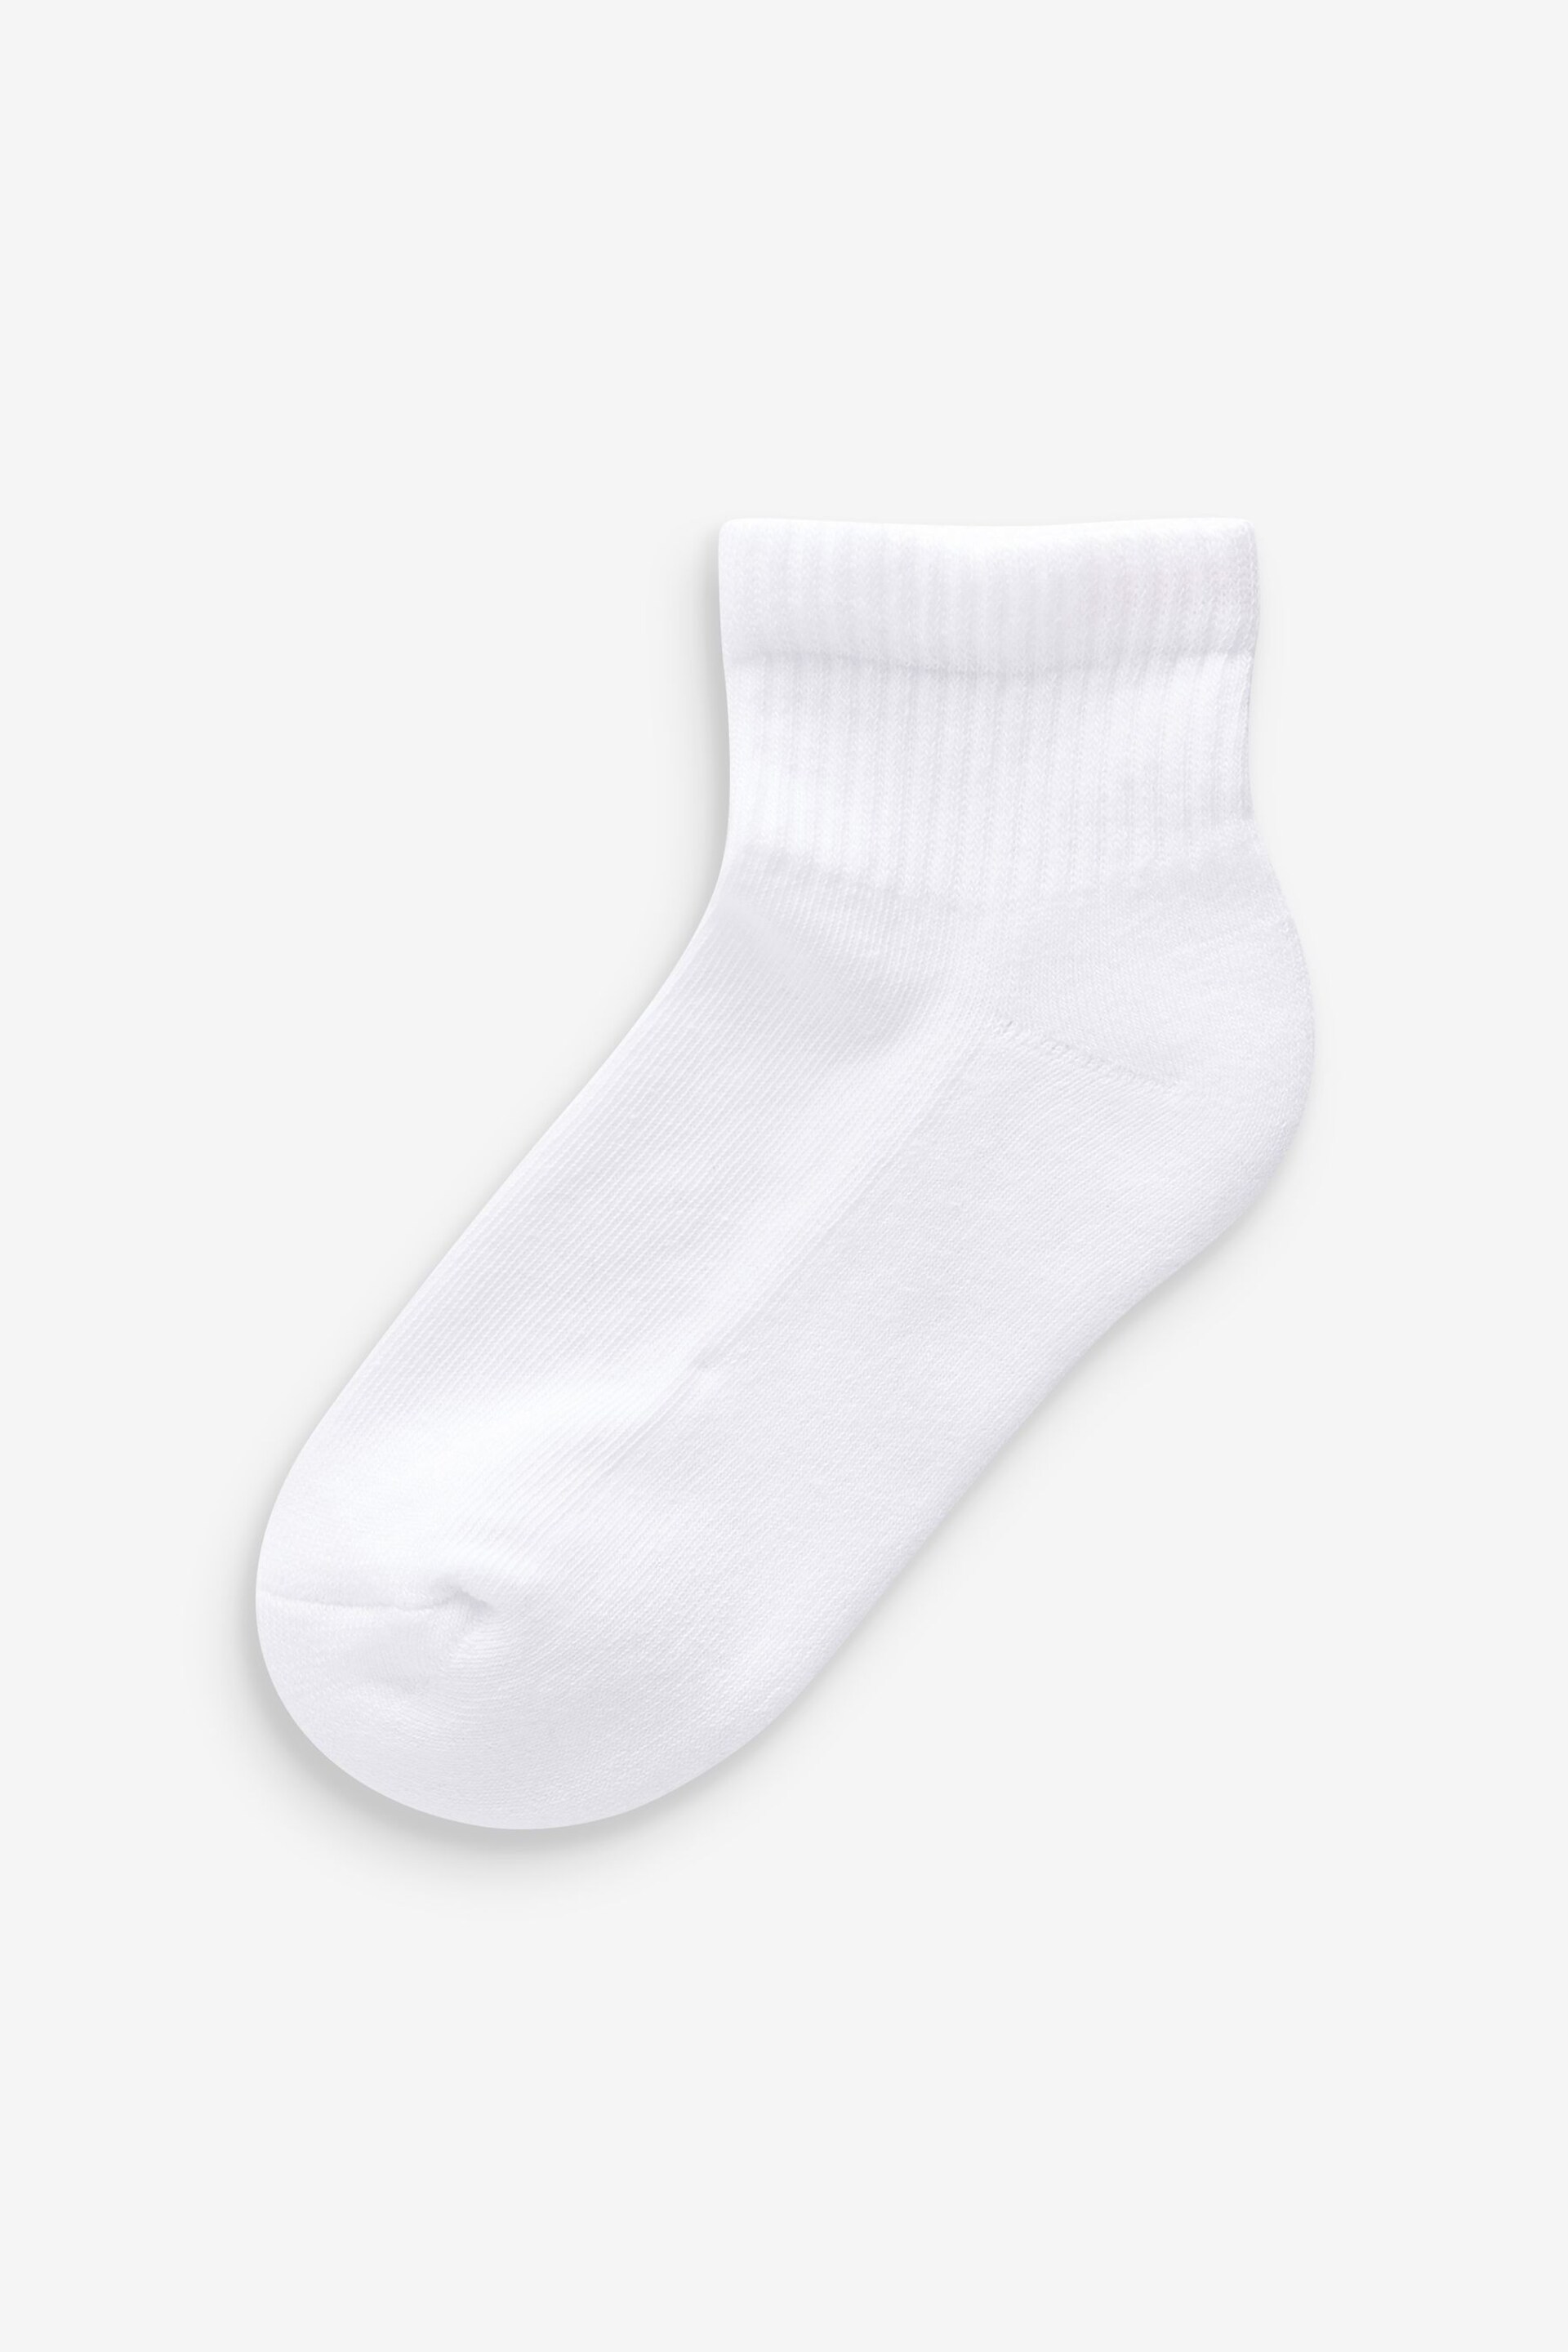 White Cropped Length Cotton Rich Cushioned Footbed Ribbed Ankle Socks 5 Pack - Image 6 of 6